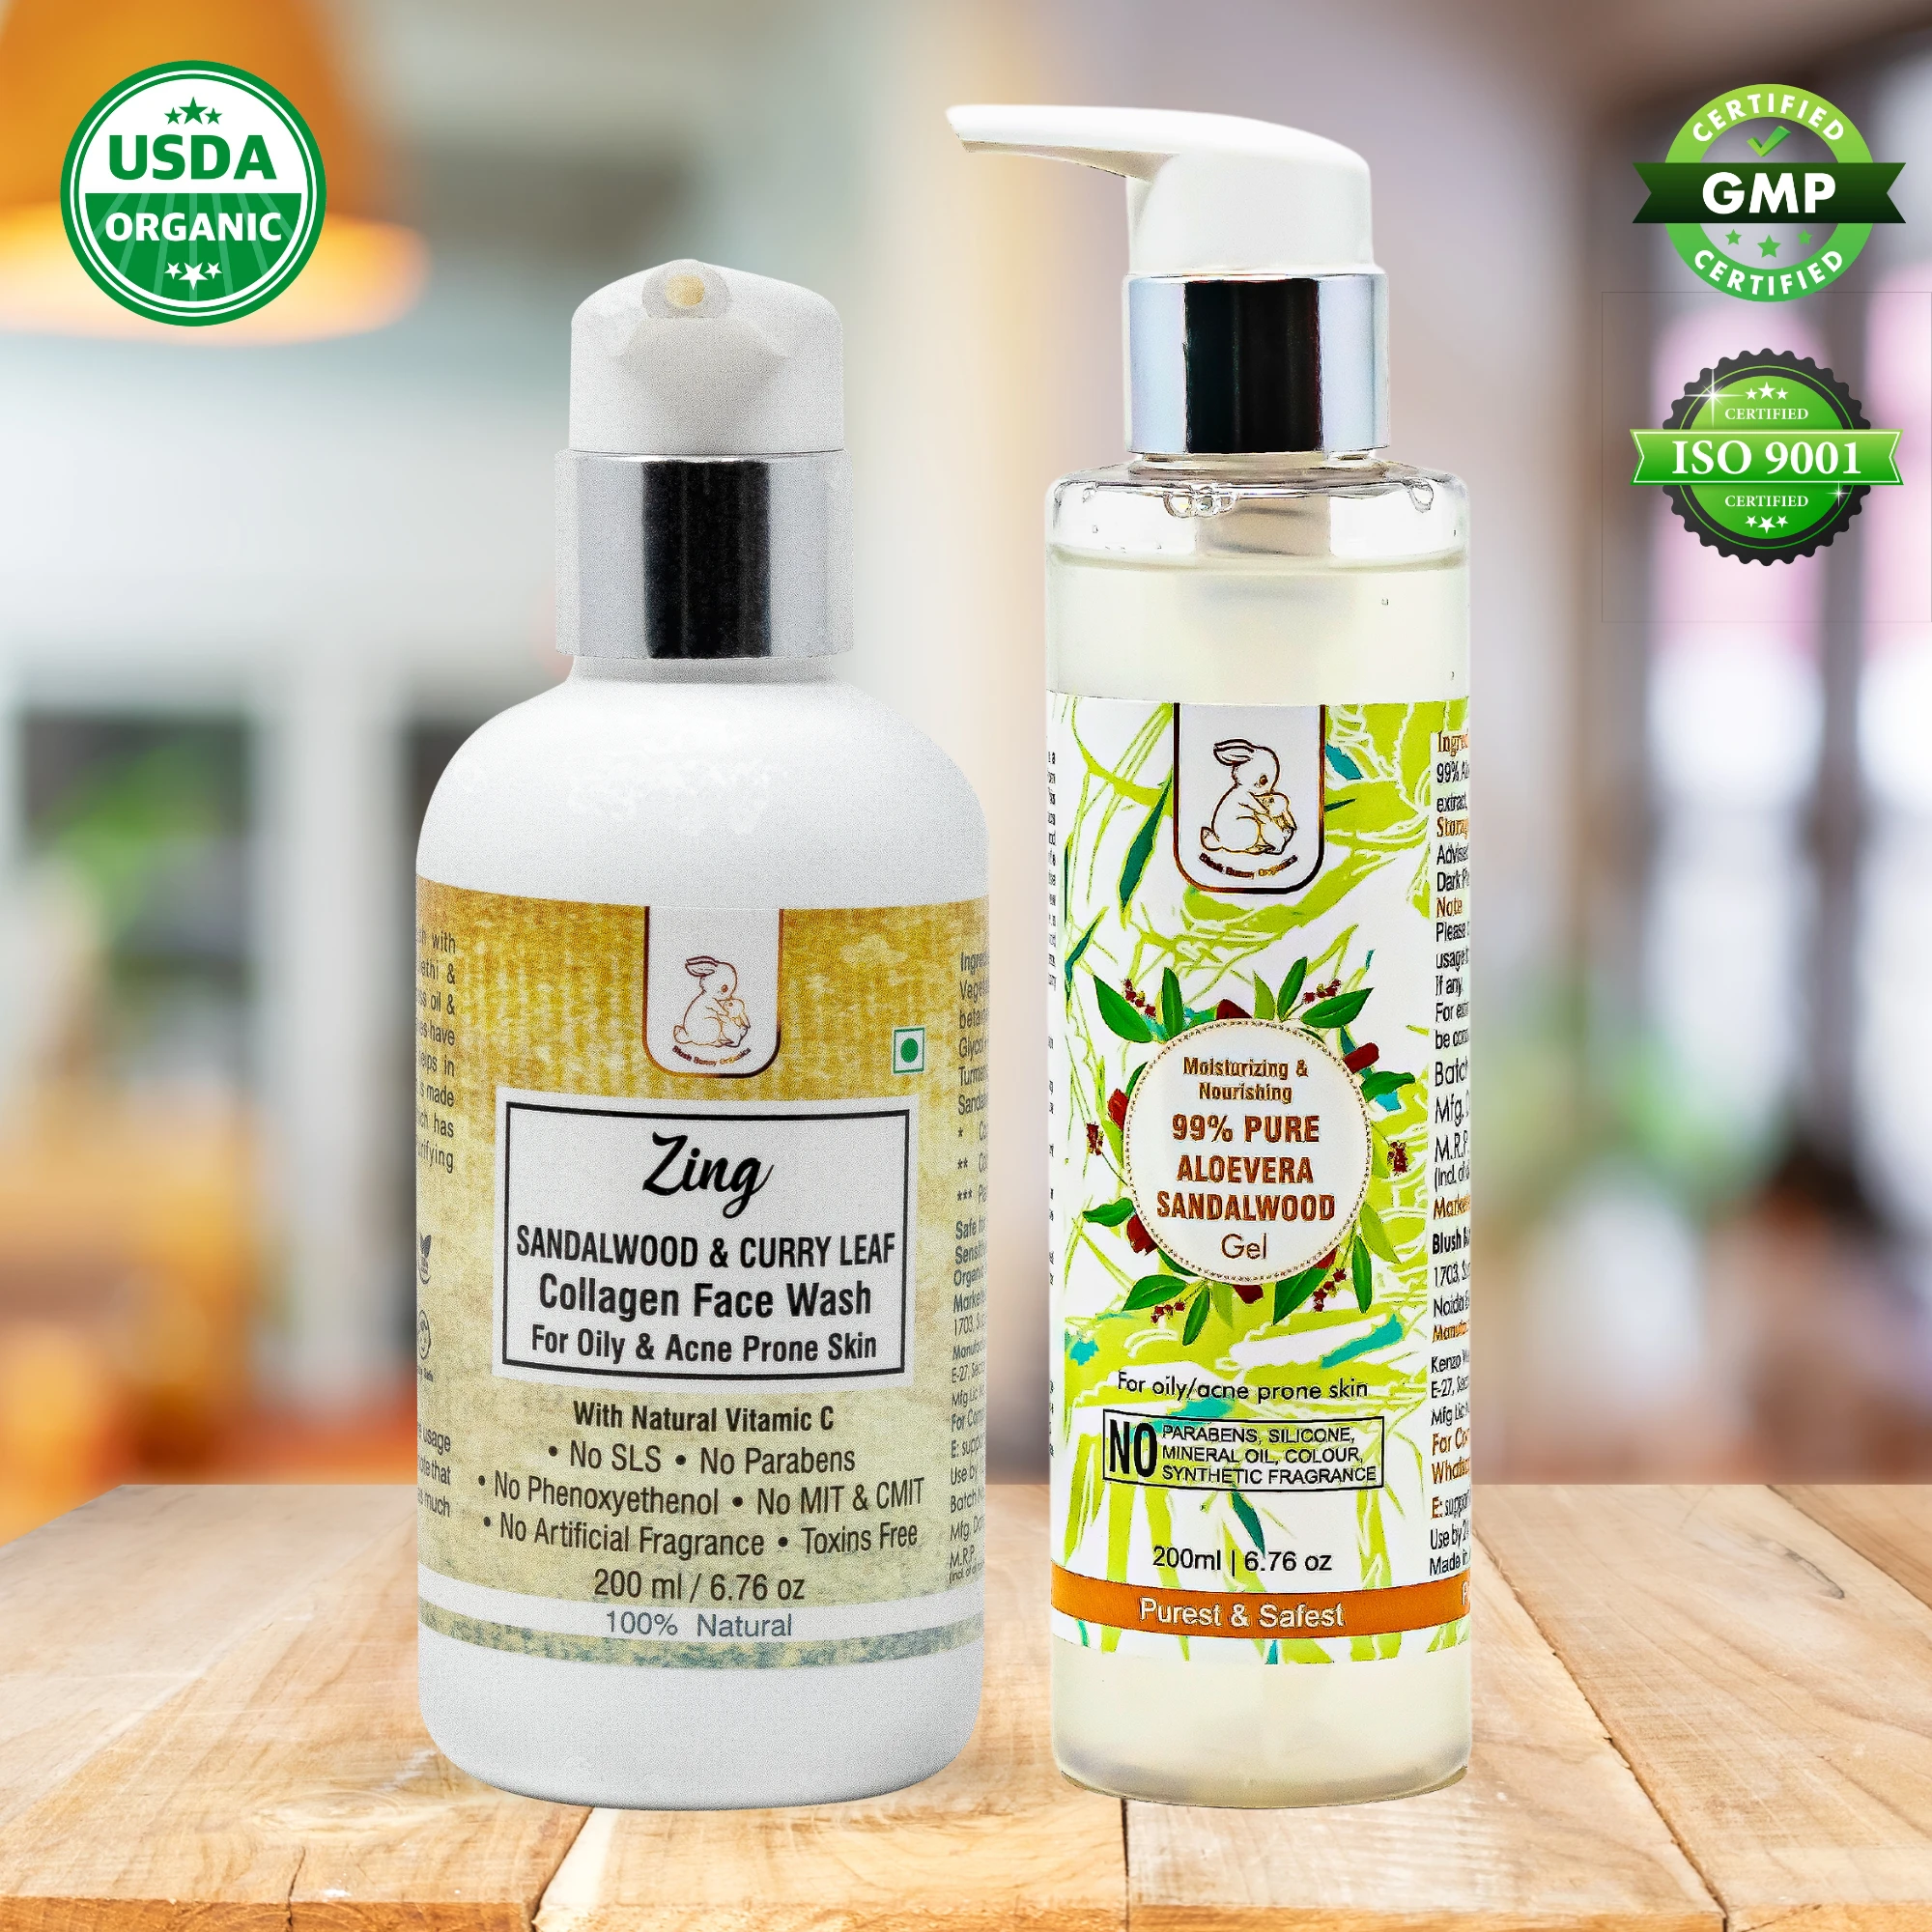 Combo Pack – Blush Bunny Organics Zing Collagen Face Wash & Nourishing Aloevera Sandalwood Gel for Oily & Acne Prone Skin (2 Items in the set)